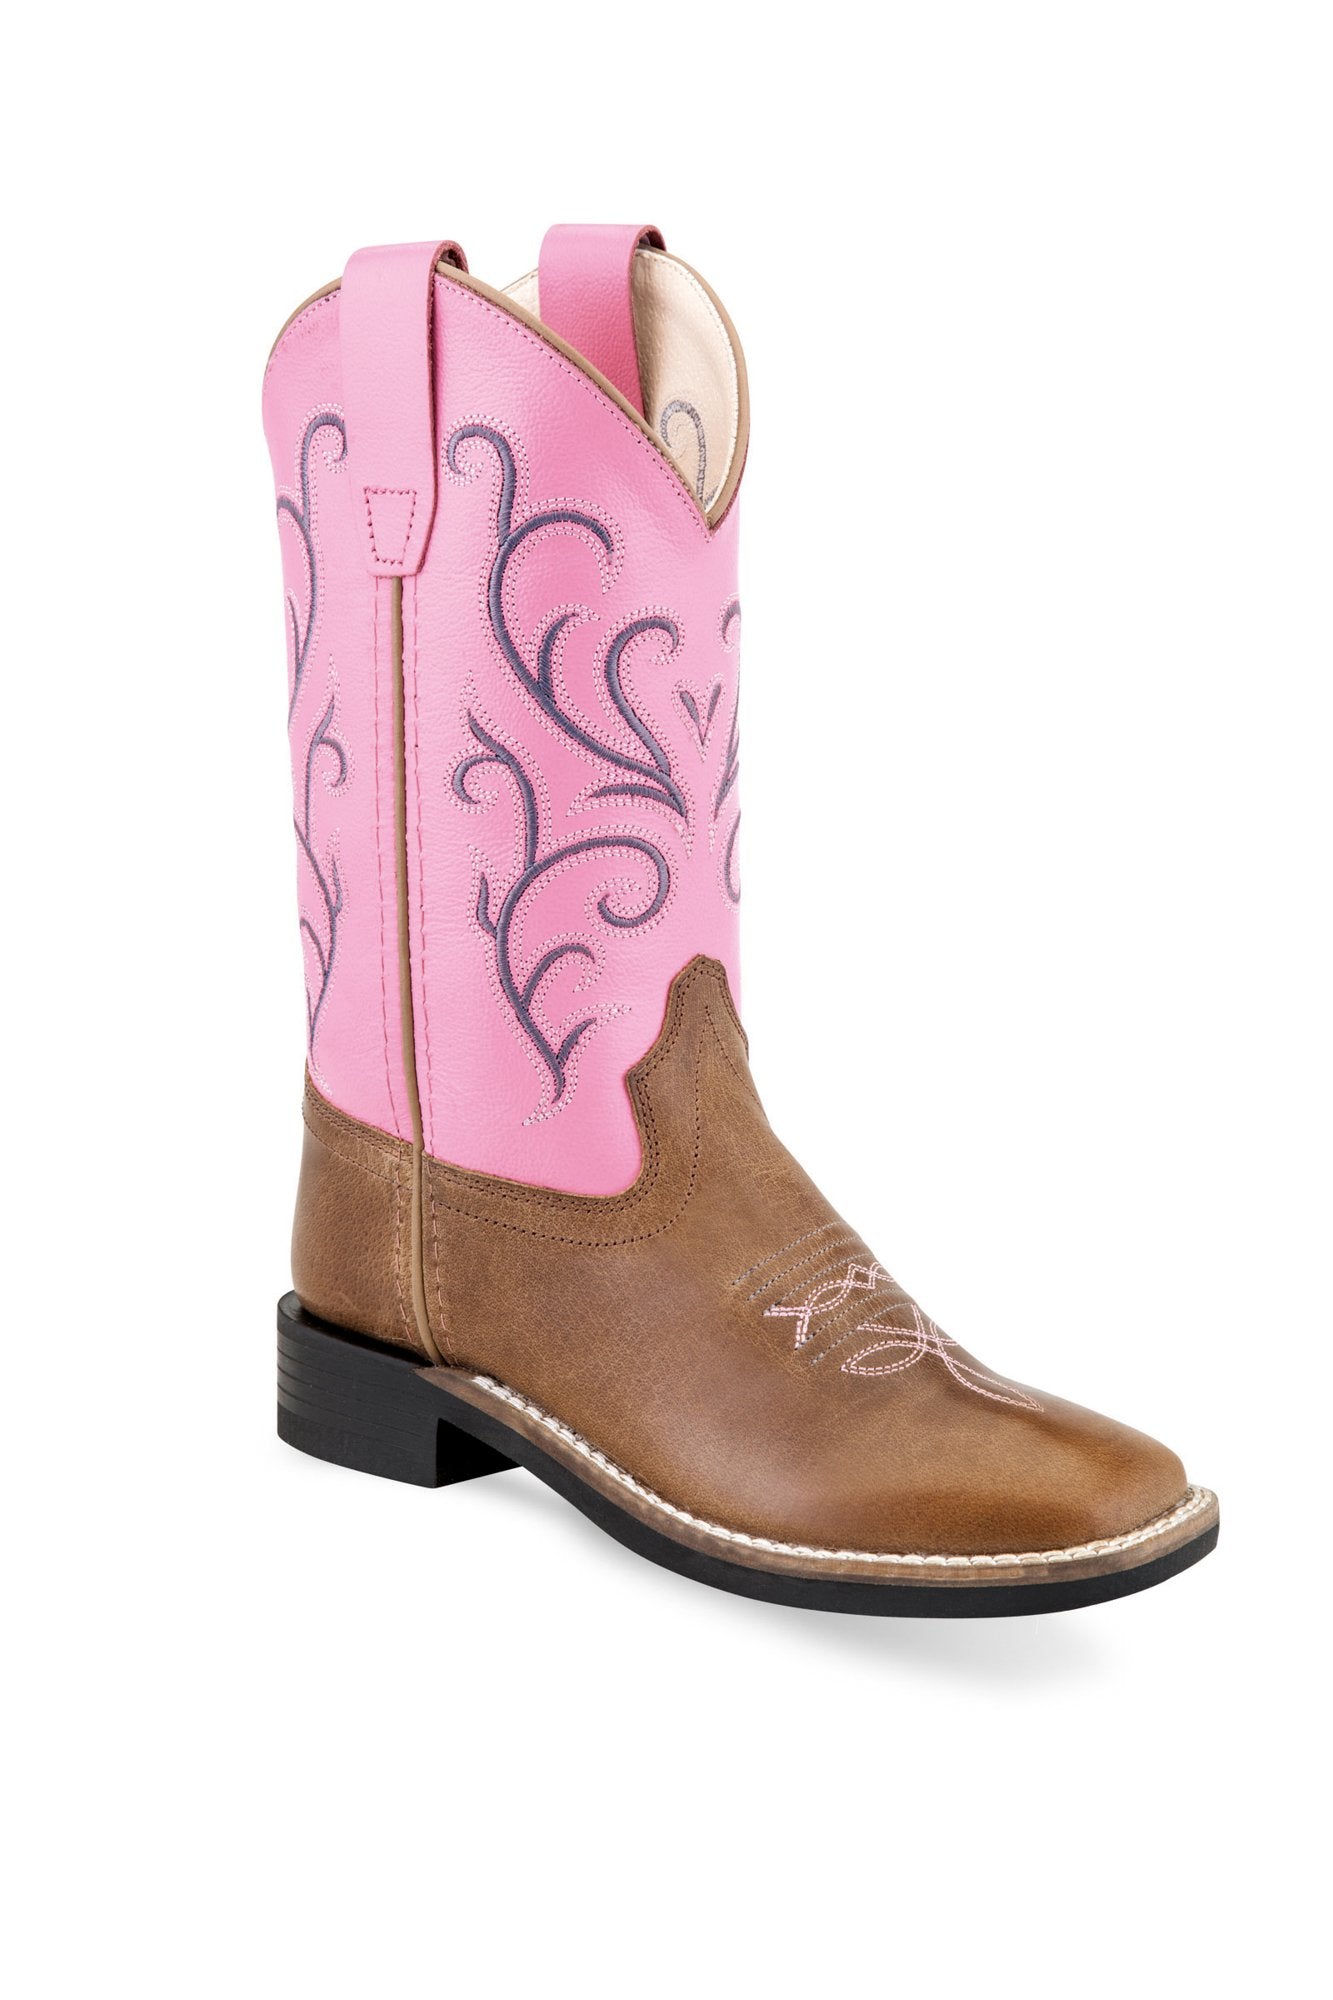 OLD WEST YOUTH TAN/PINK BOOT